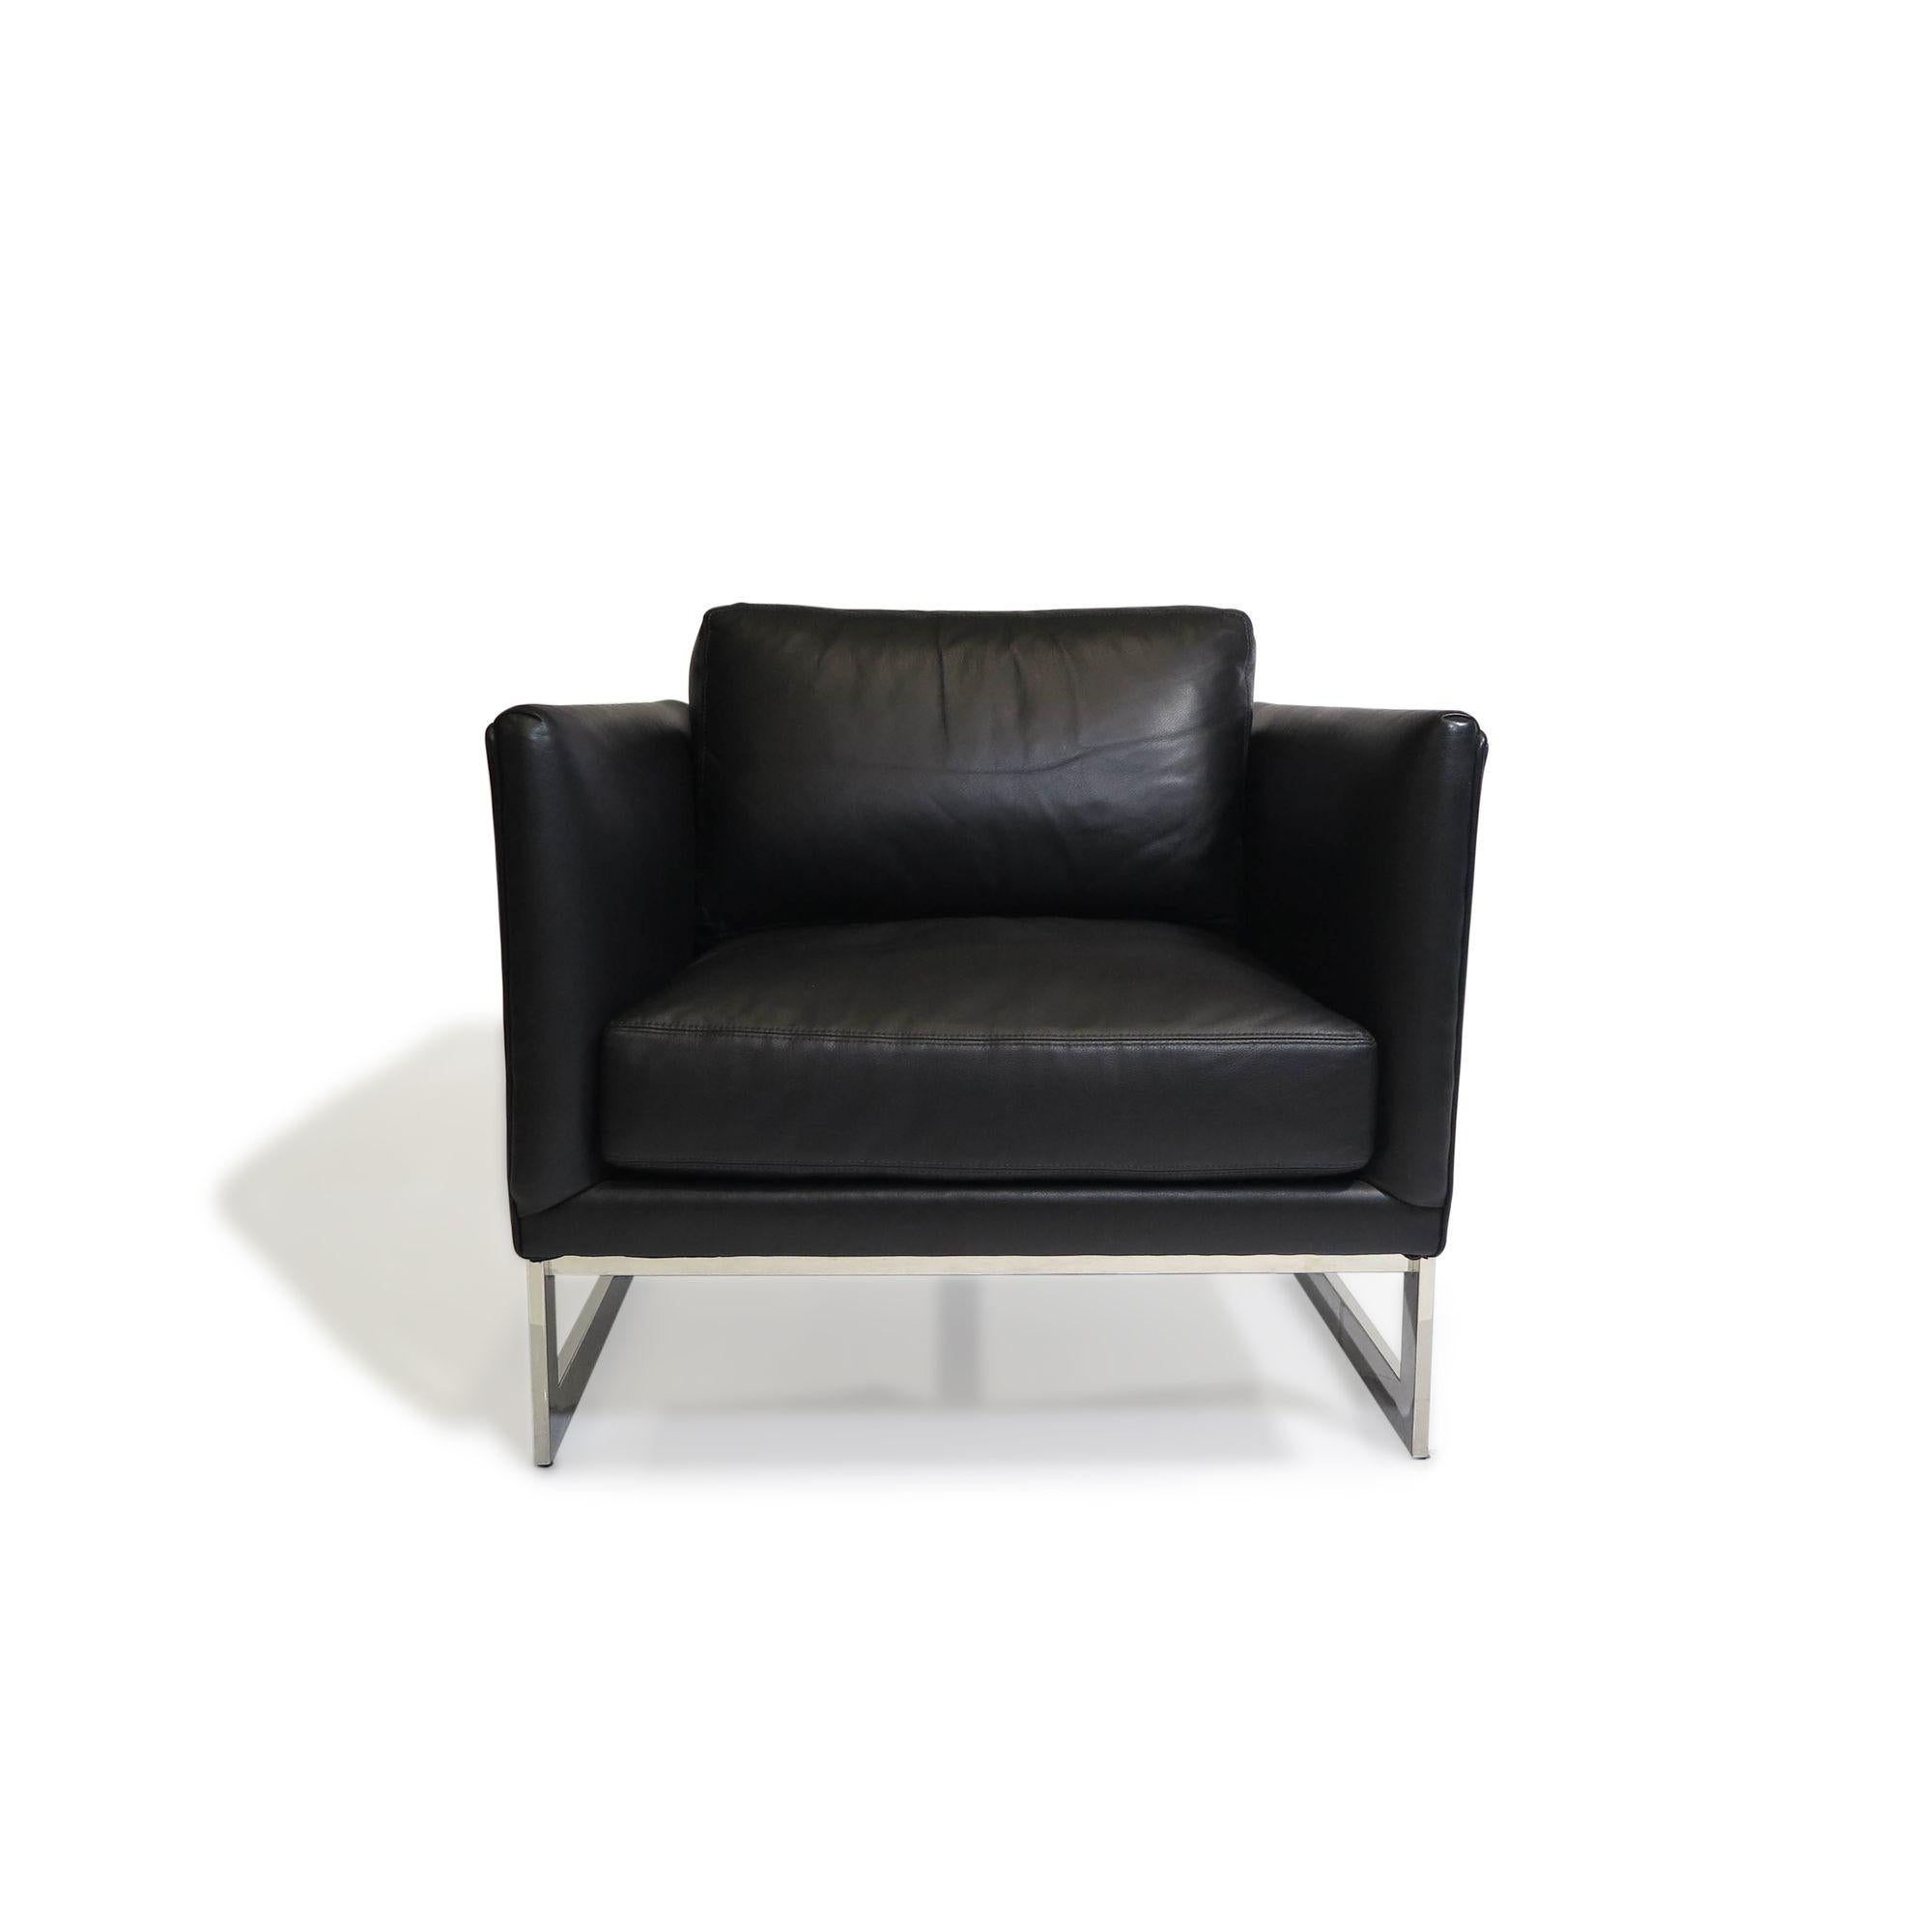 Milo Baughman Black Leather and Chrome Lounge Chair for Thayer Coggin In Good Condition For Sale In Oakland, CA